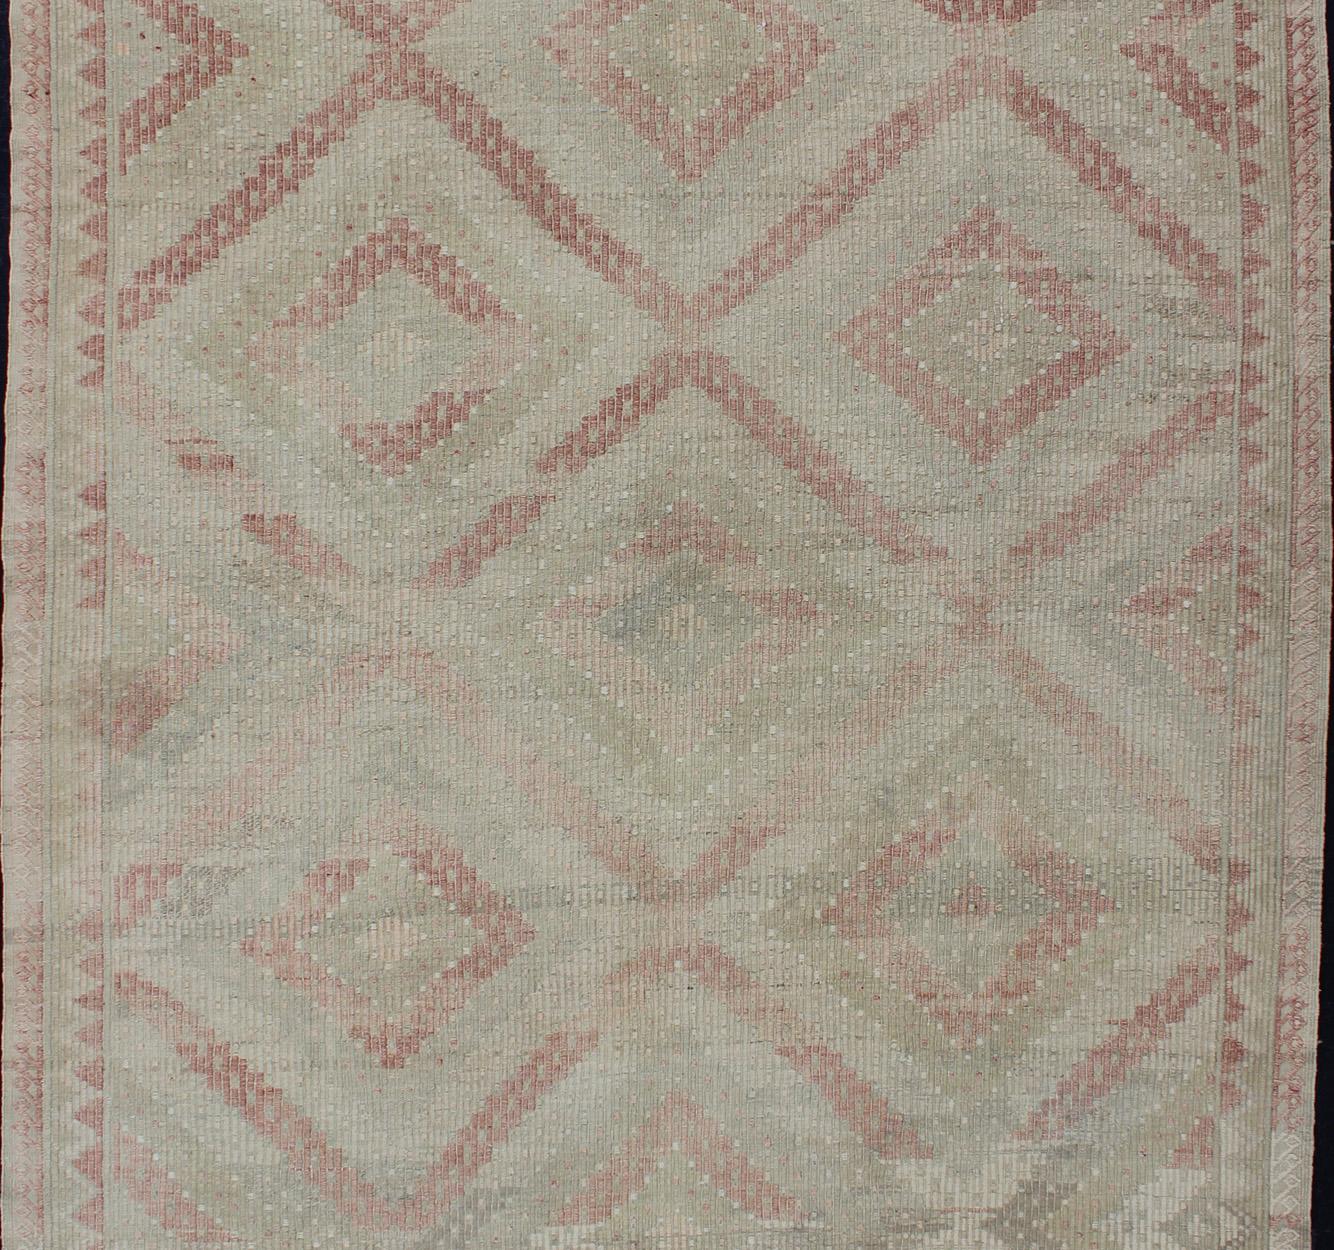 Kilim Vintage Turkish Embroidered Rug with Geometric Diamond Design with Soft Colors For Sale